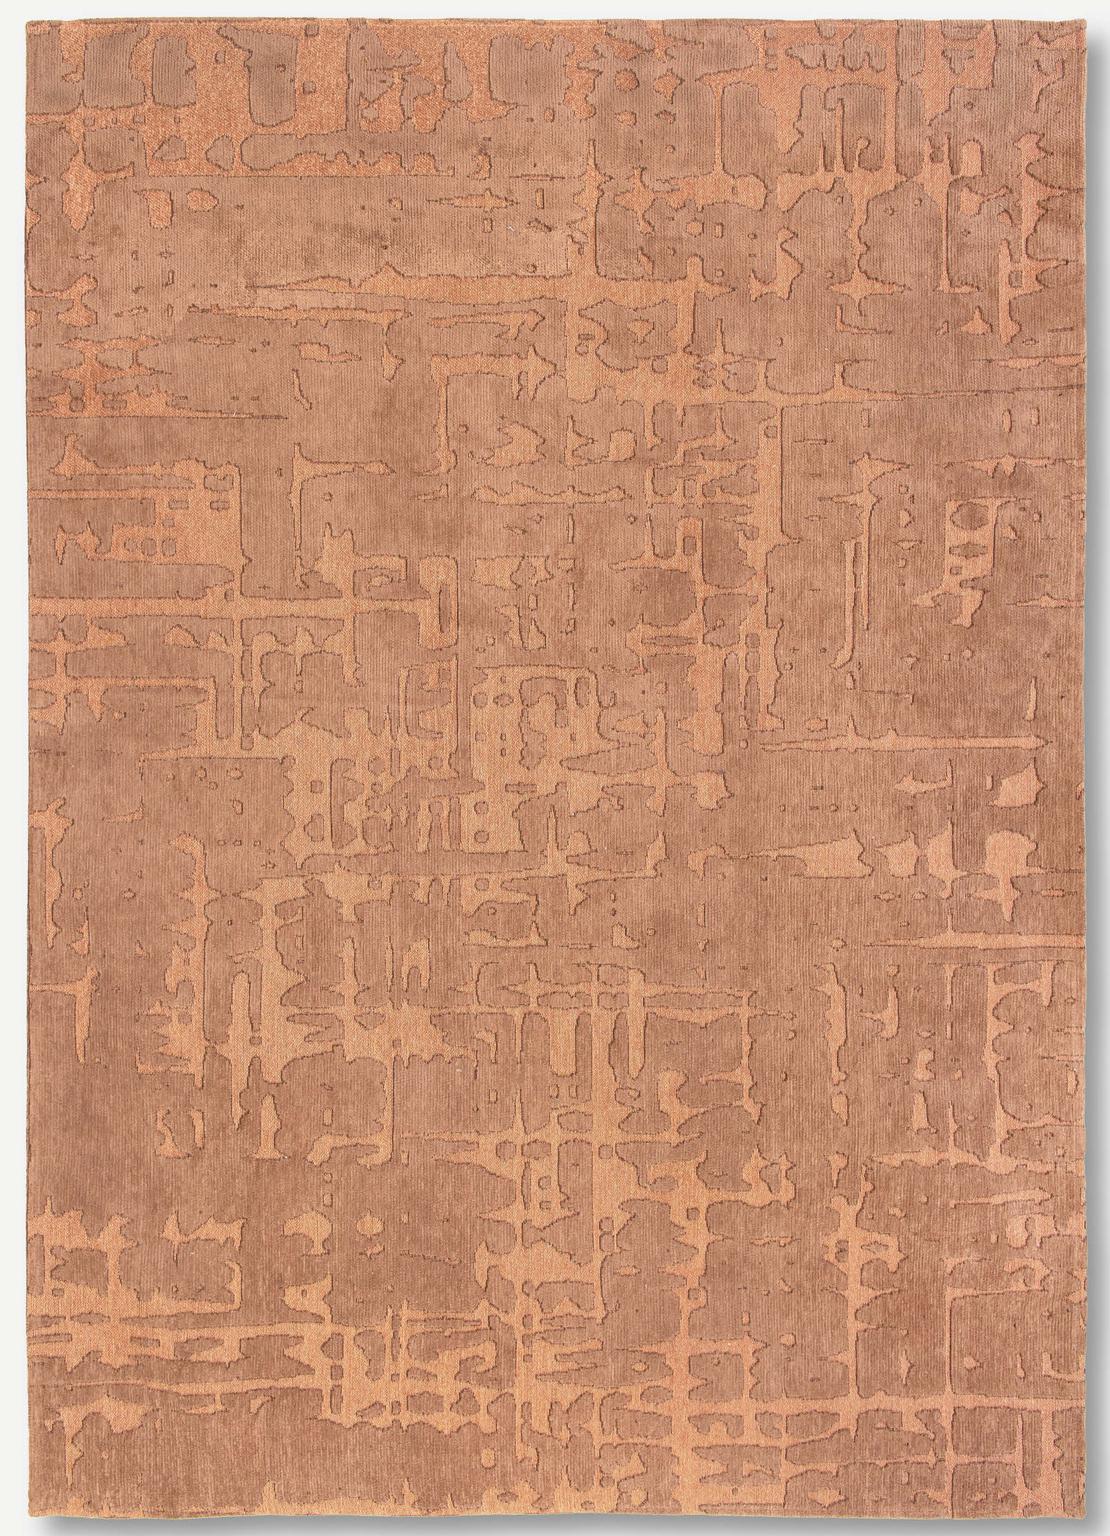 Abstract Brown Belgian Rug ☞ Size: 8' x 11' 2" (240 x 340 cm)